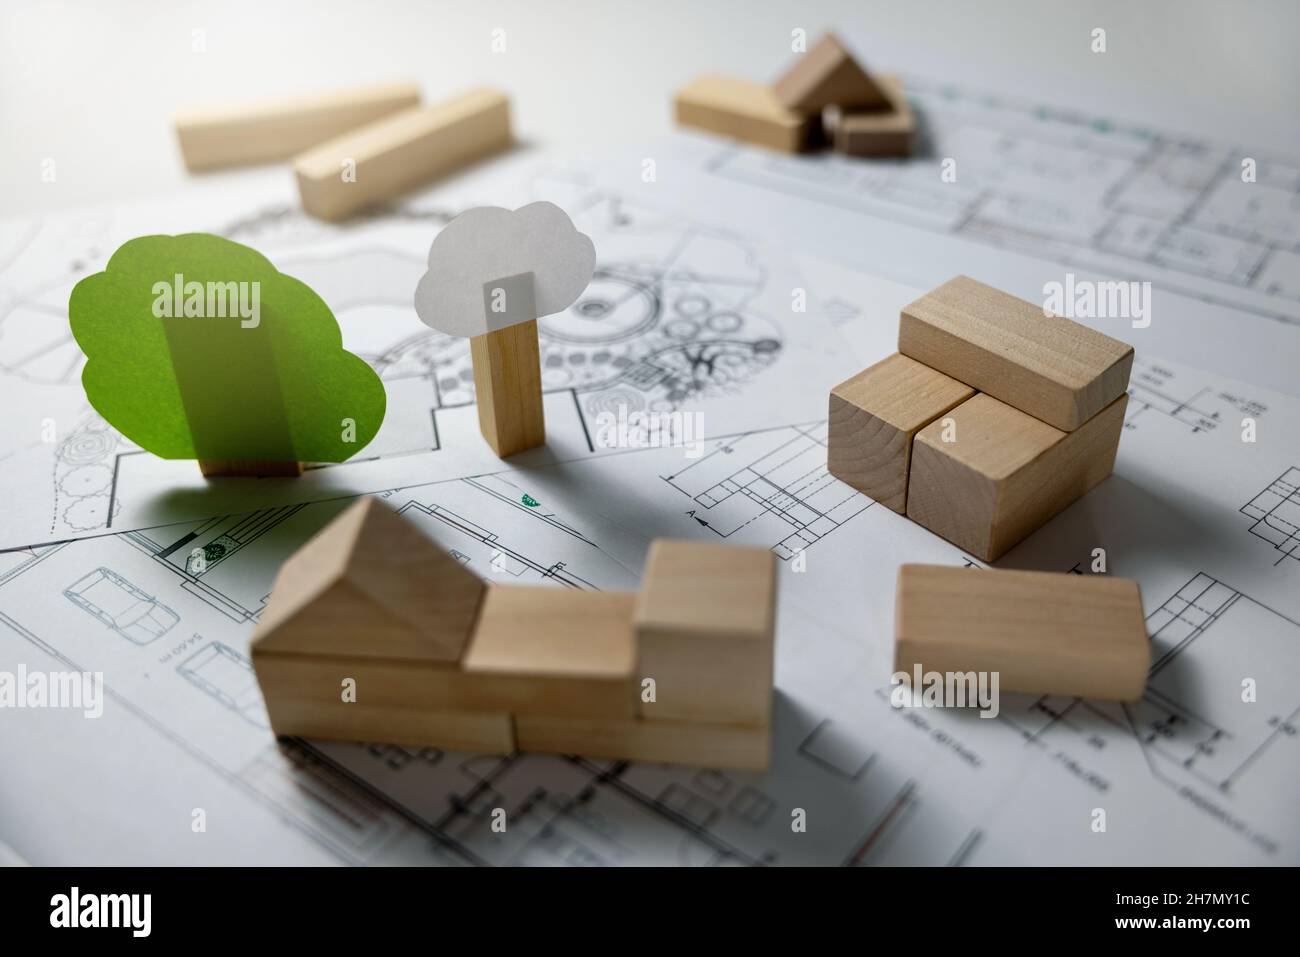 building materials from renewable resources. environment friendly construction and manufacturing Stock Photo